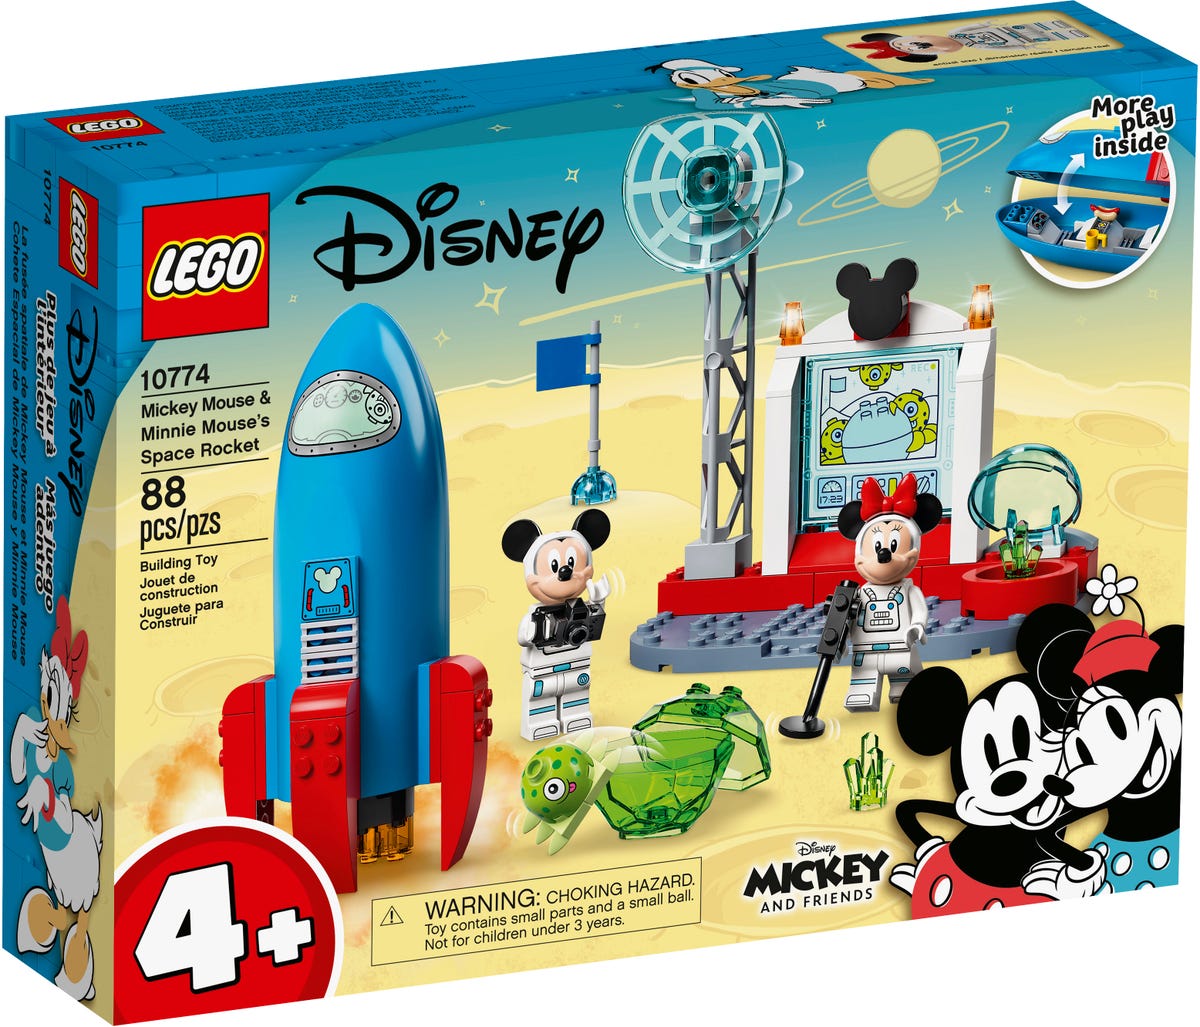 LEGO Disney - Mickey Mouse & Minnie Mouses Space Rock (10774) | LEGO